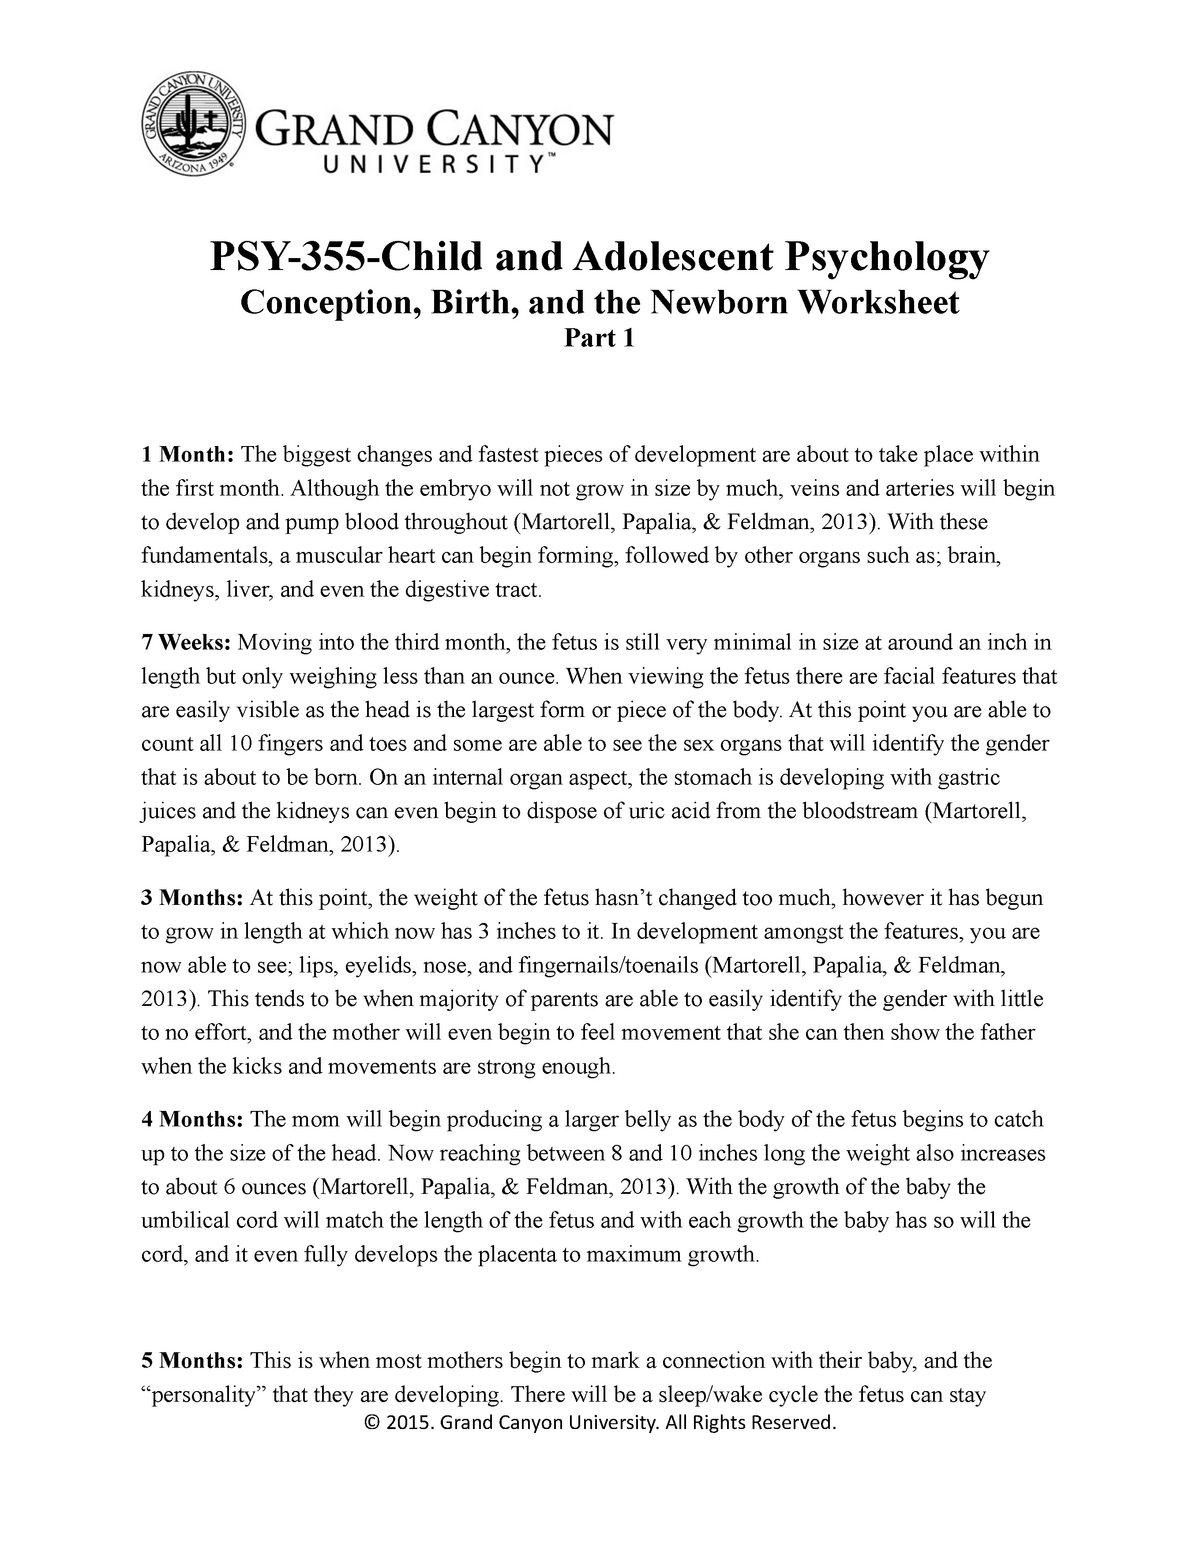 research and child development paper psy 355